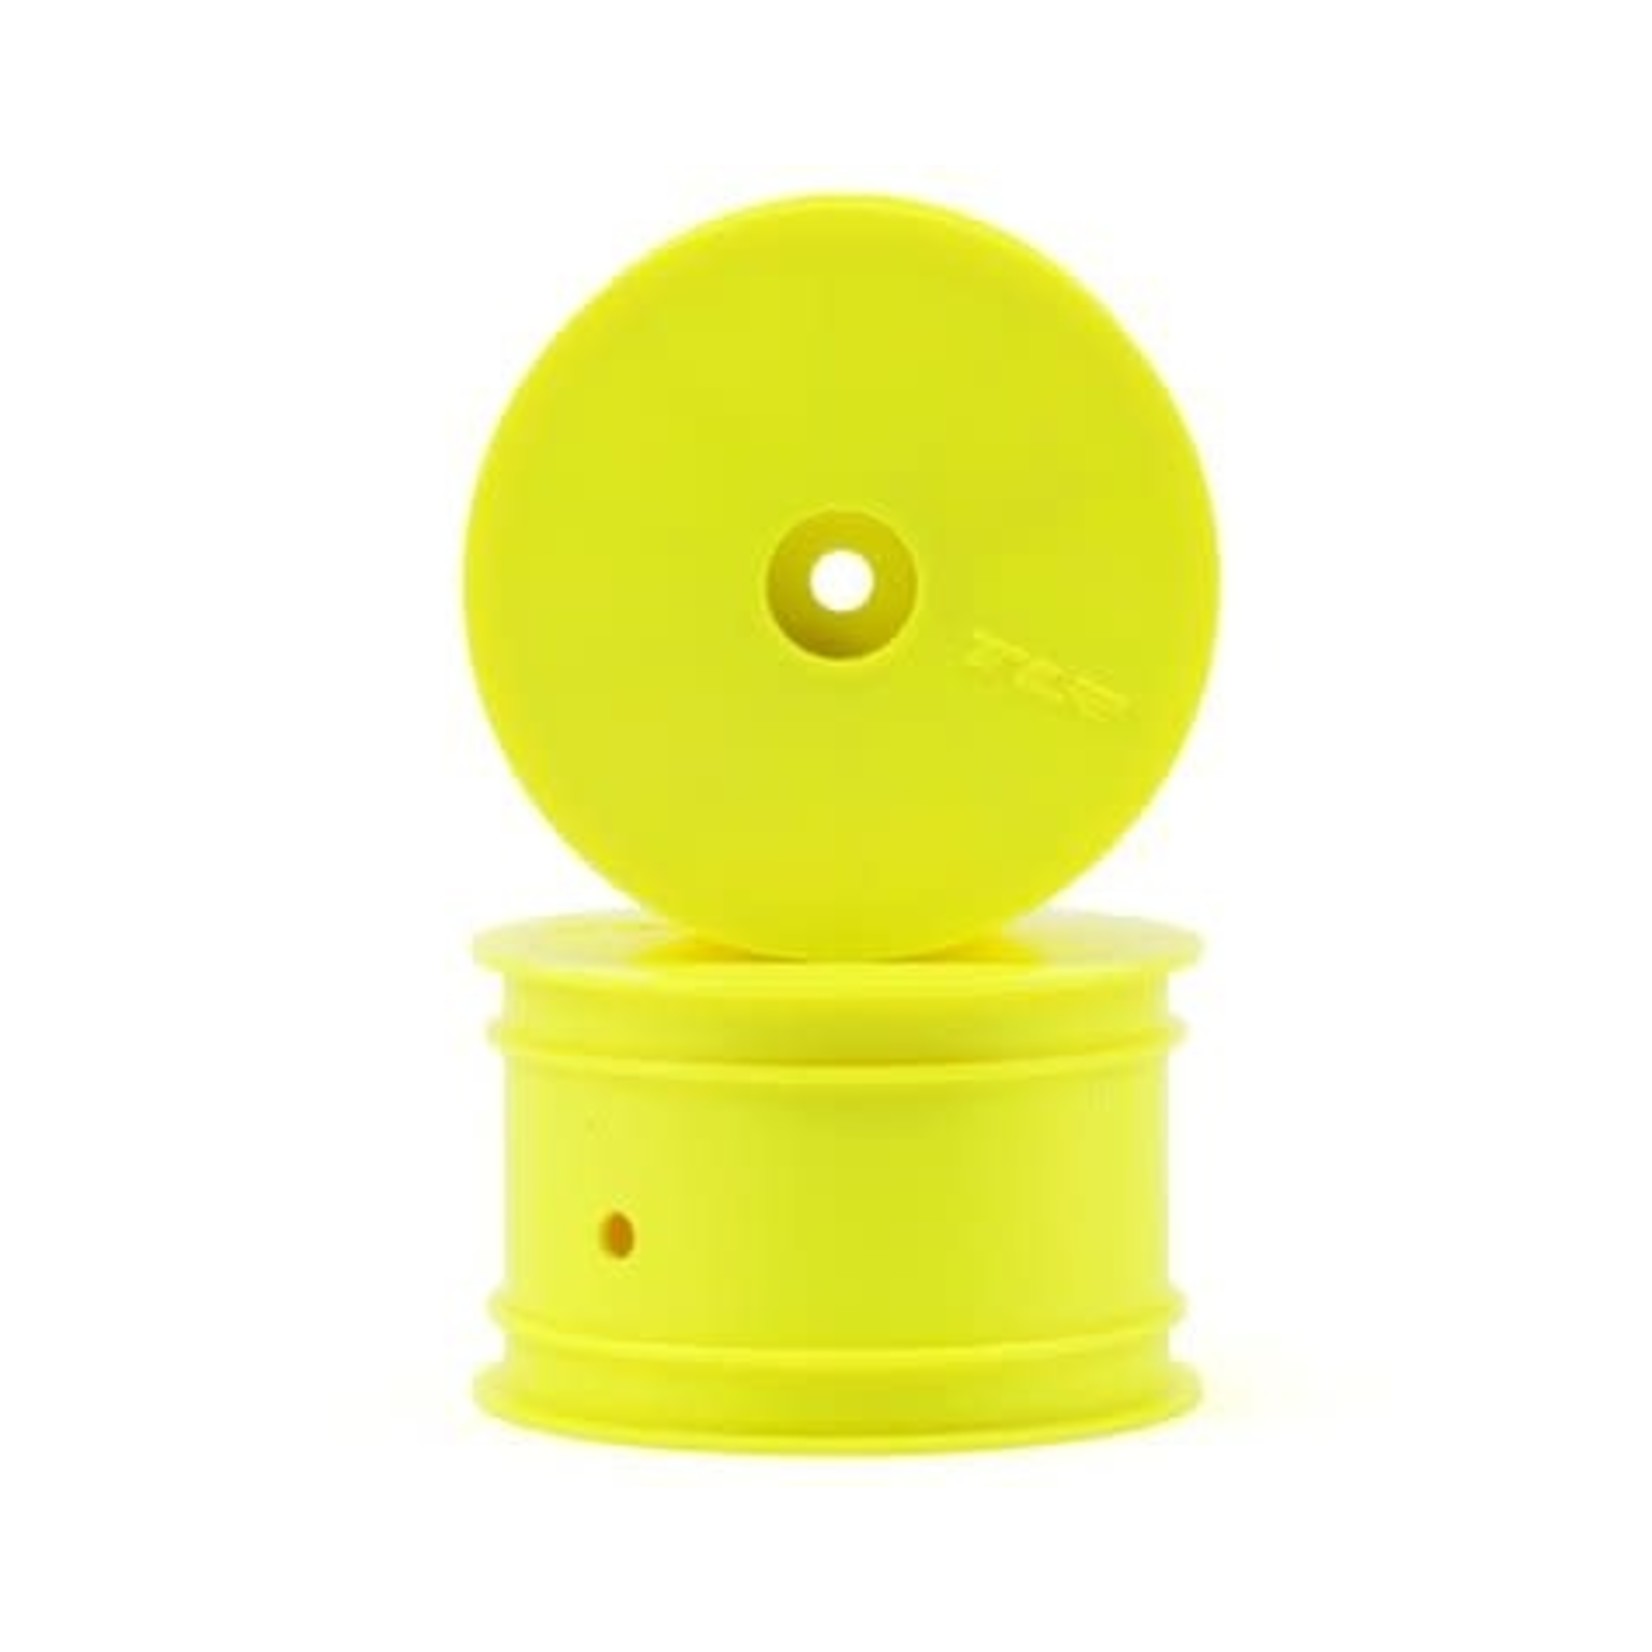 TLR Team Losi Racing 12mm Hex 1/10 Rear Buggy Wheels (Yellow) (2) (22 3.0/22-4) #TLR7101